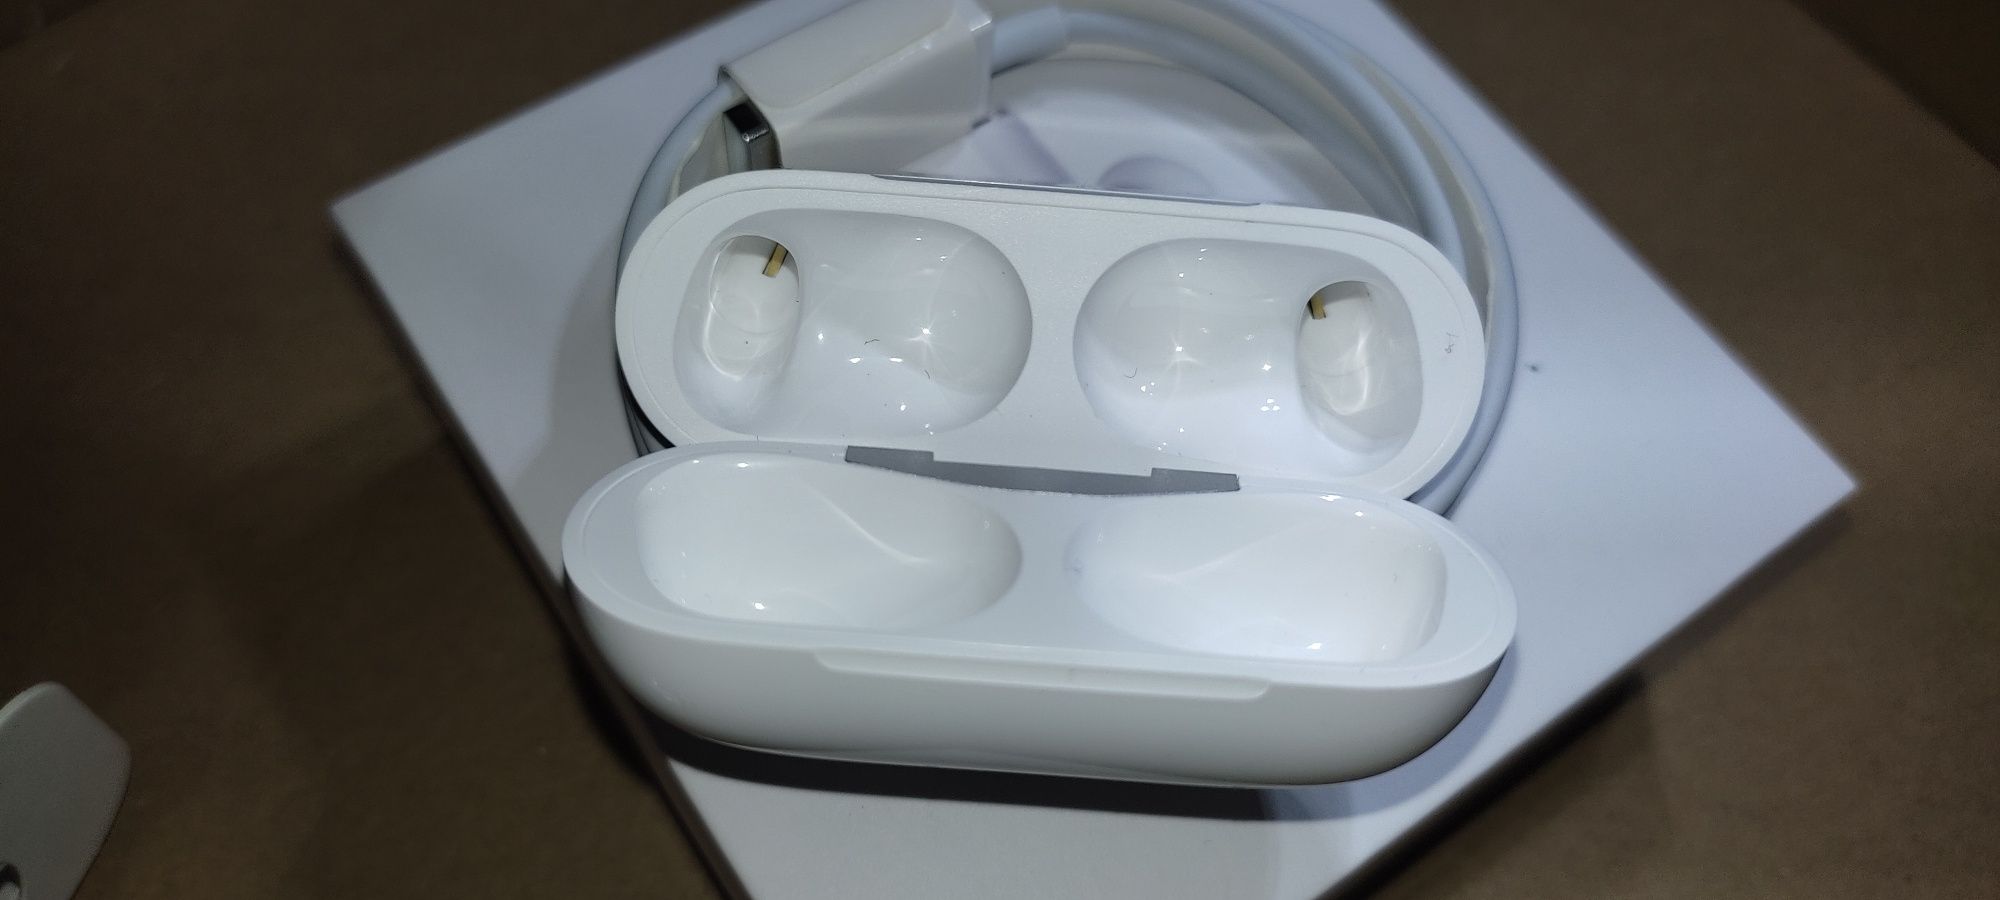 Airpods pro 1generation